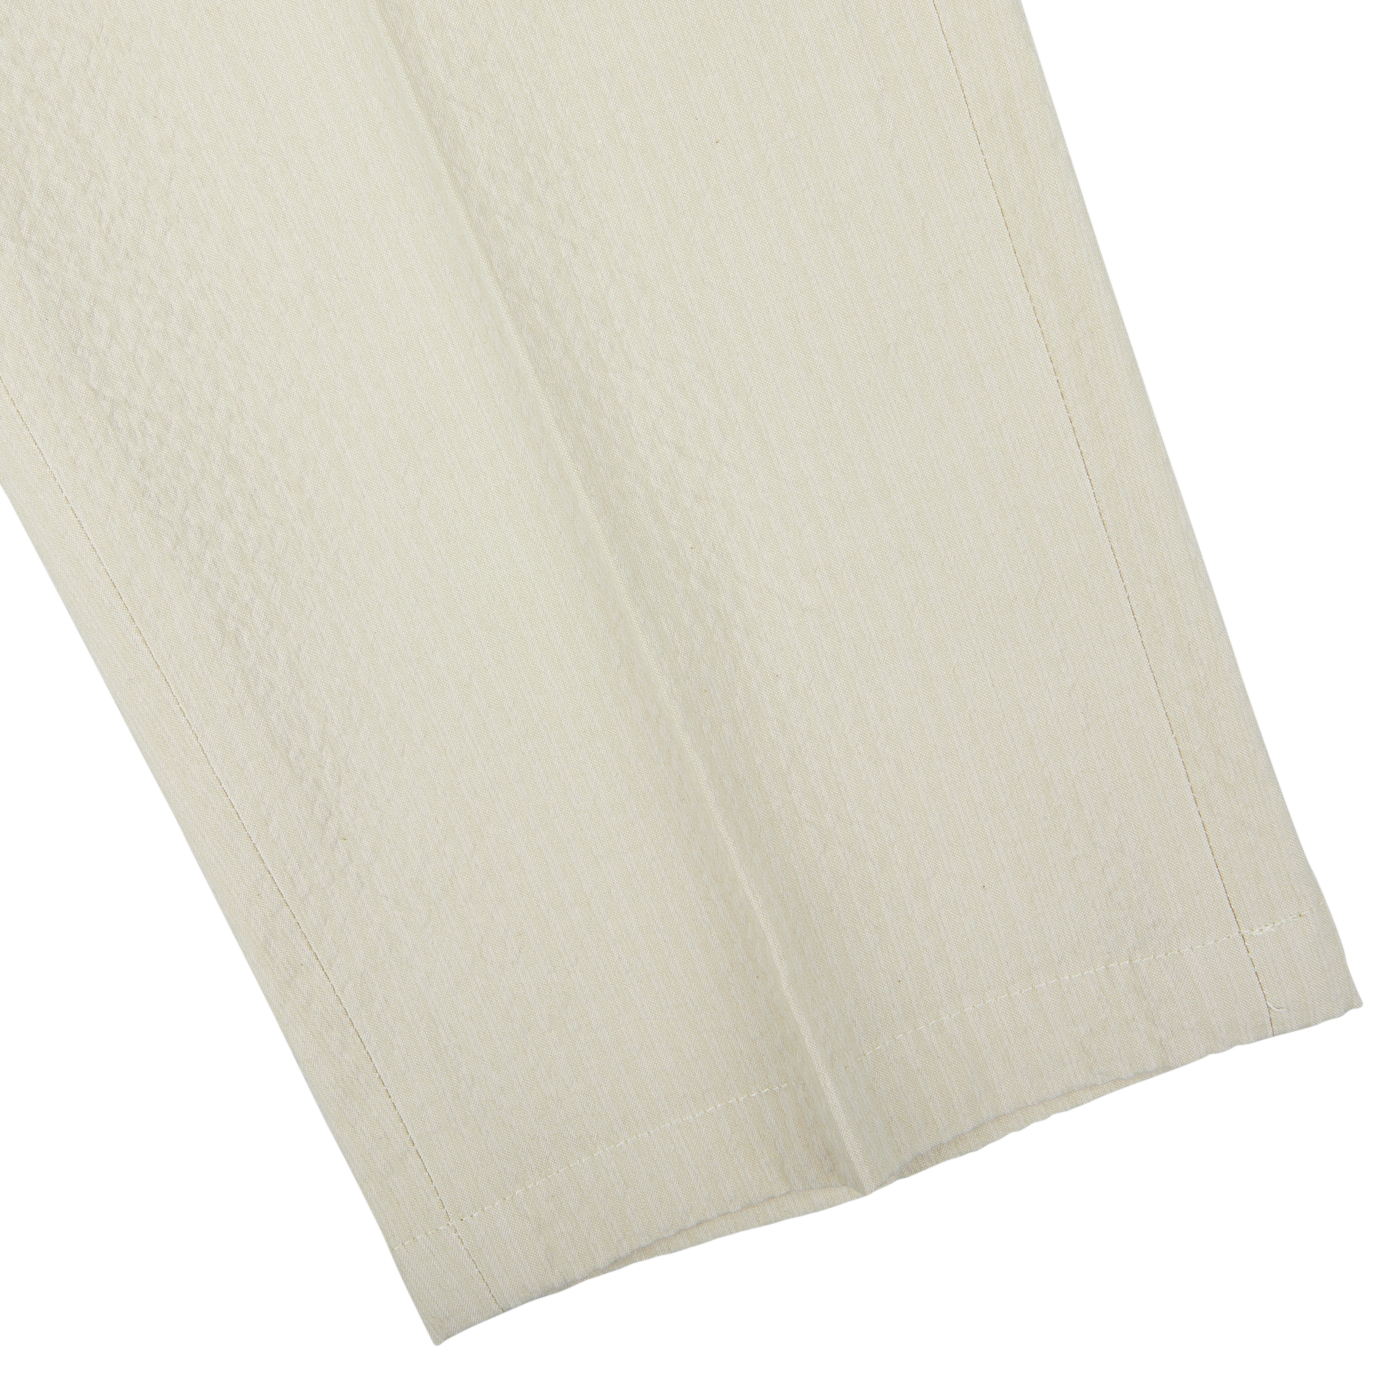 Close-up of a folded cream De Petrillo trousers made of cotton seersucker fabric with textured pattern on a white background.